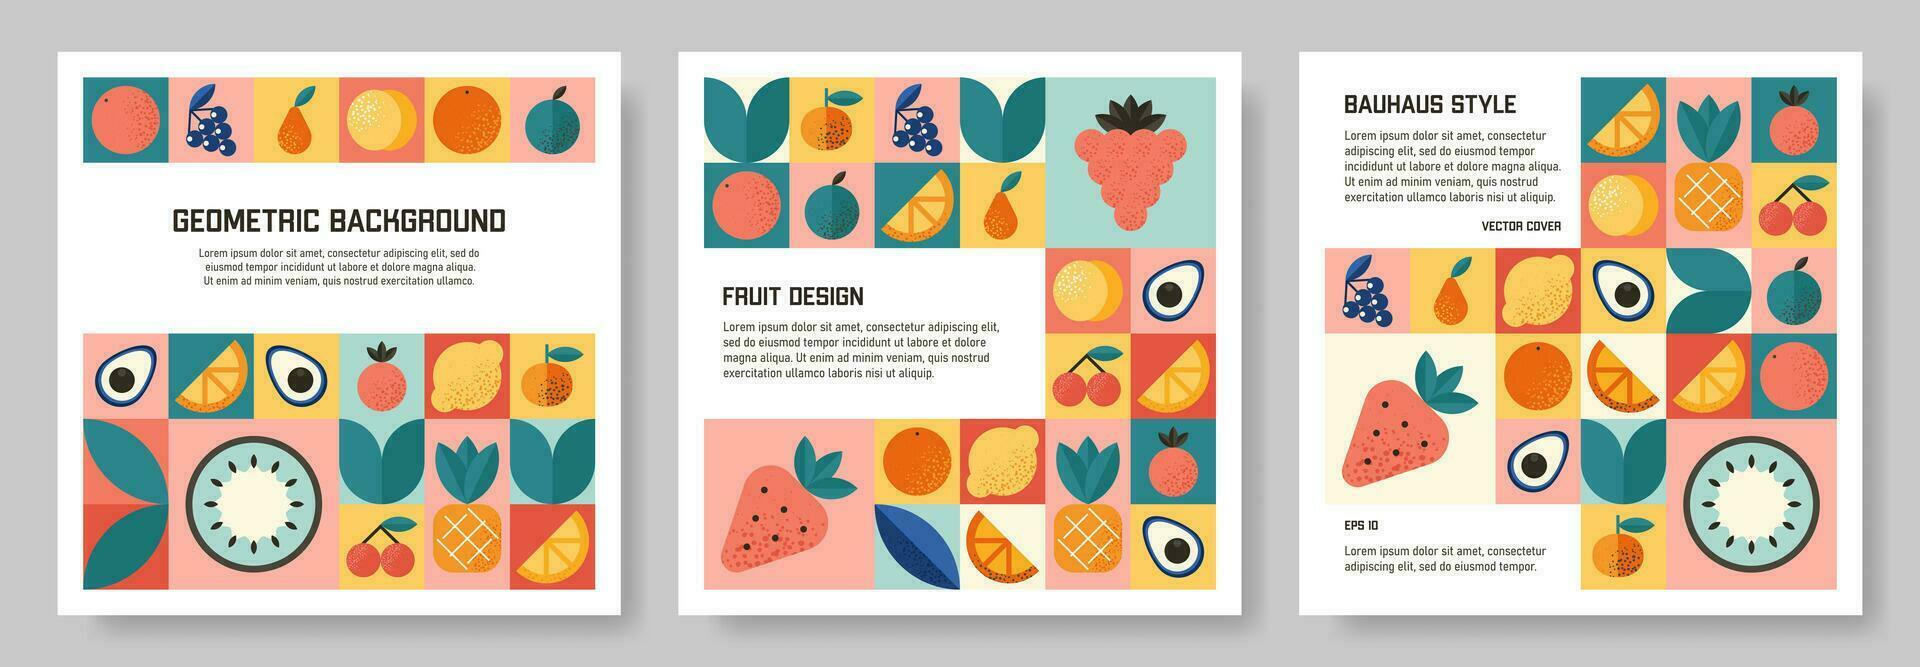 Set of Abstract geometric pattern background in Bauhaus style with various fruits and berries. Colorful vector design template for cover, poster, brochure, banner, menu. Retro illustration.